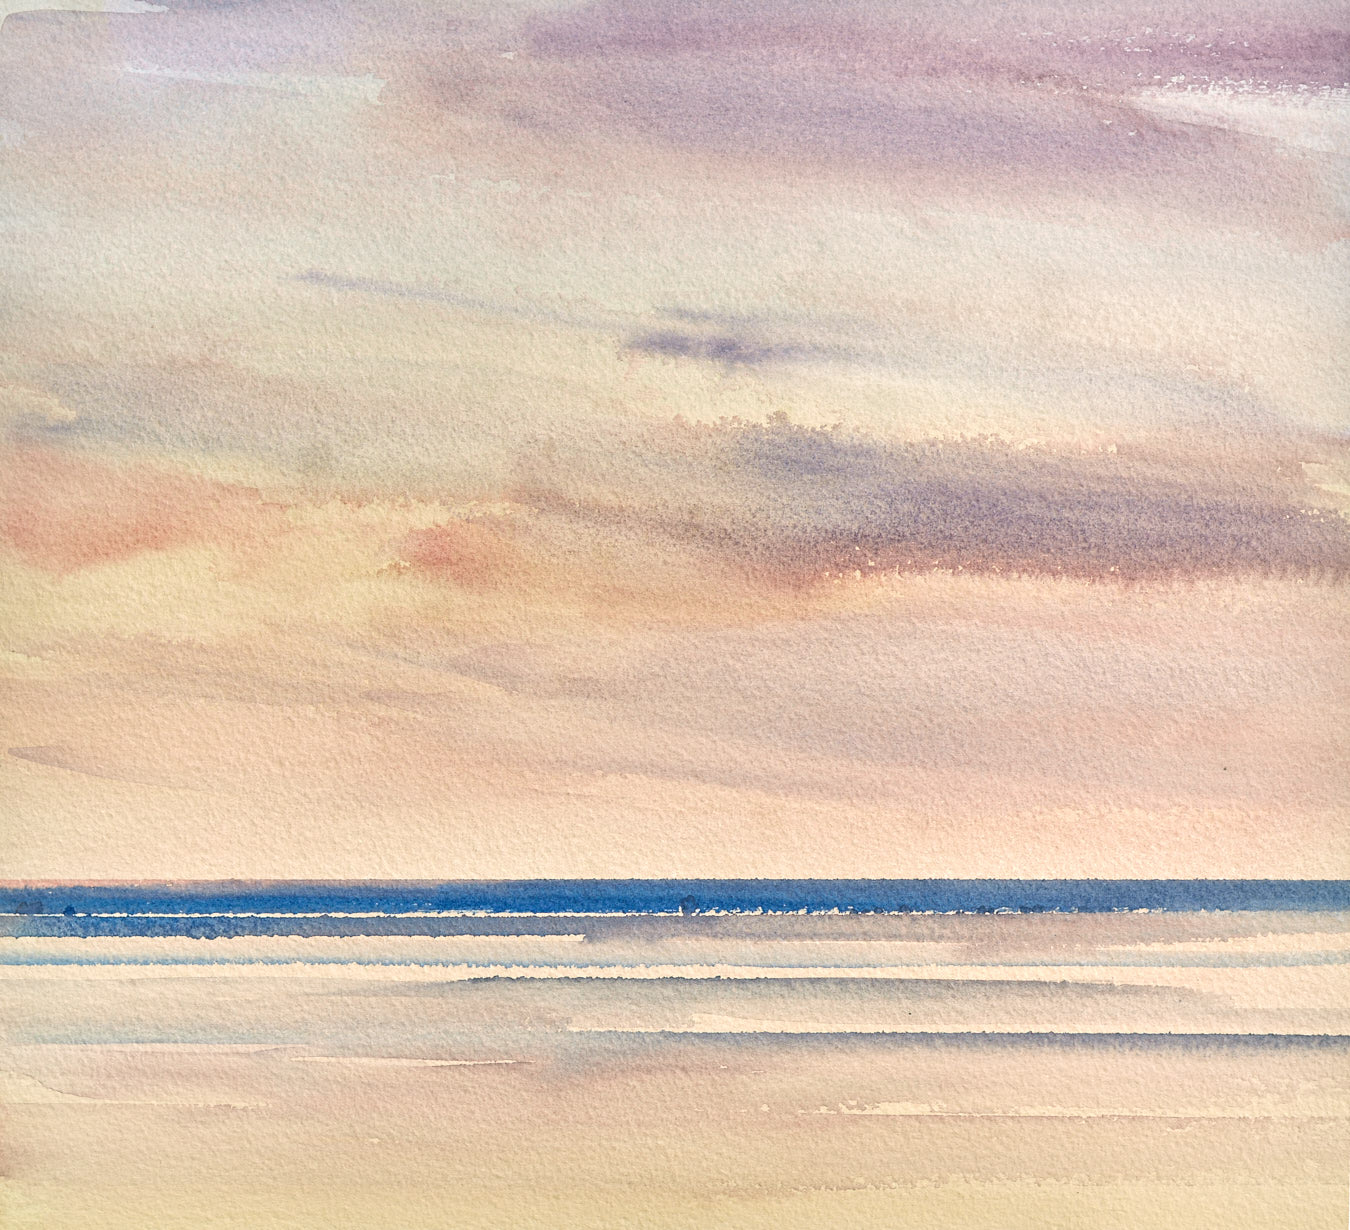 Large image of Sunset, St Annes-on-sea beach original watercolour painting by Timothy Gent